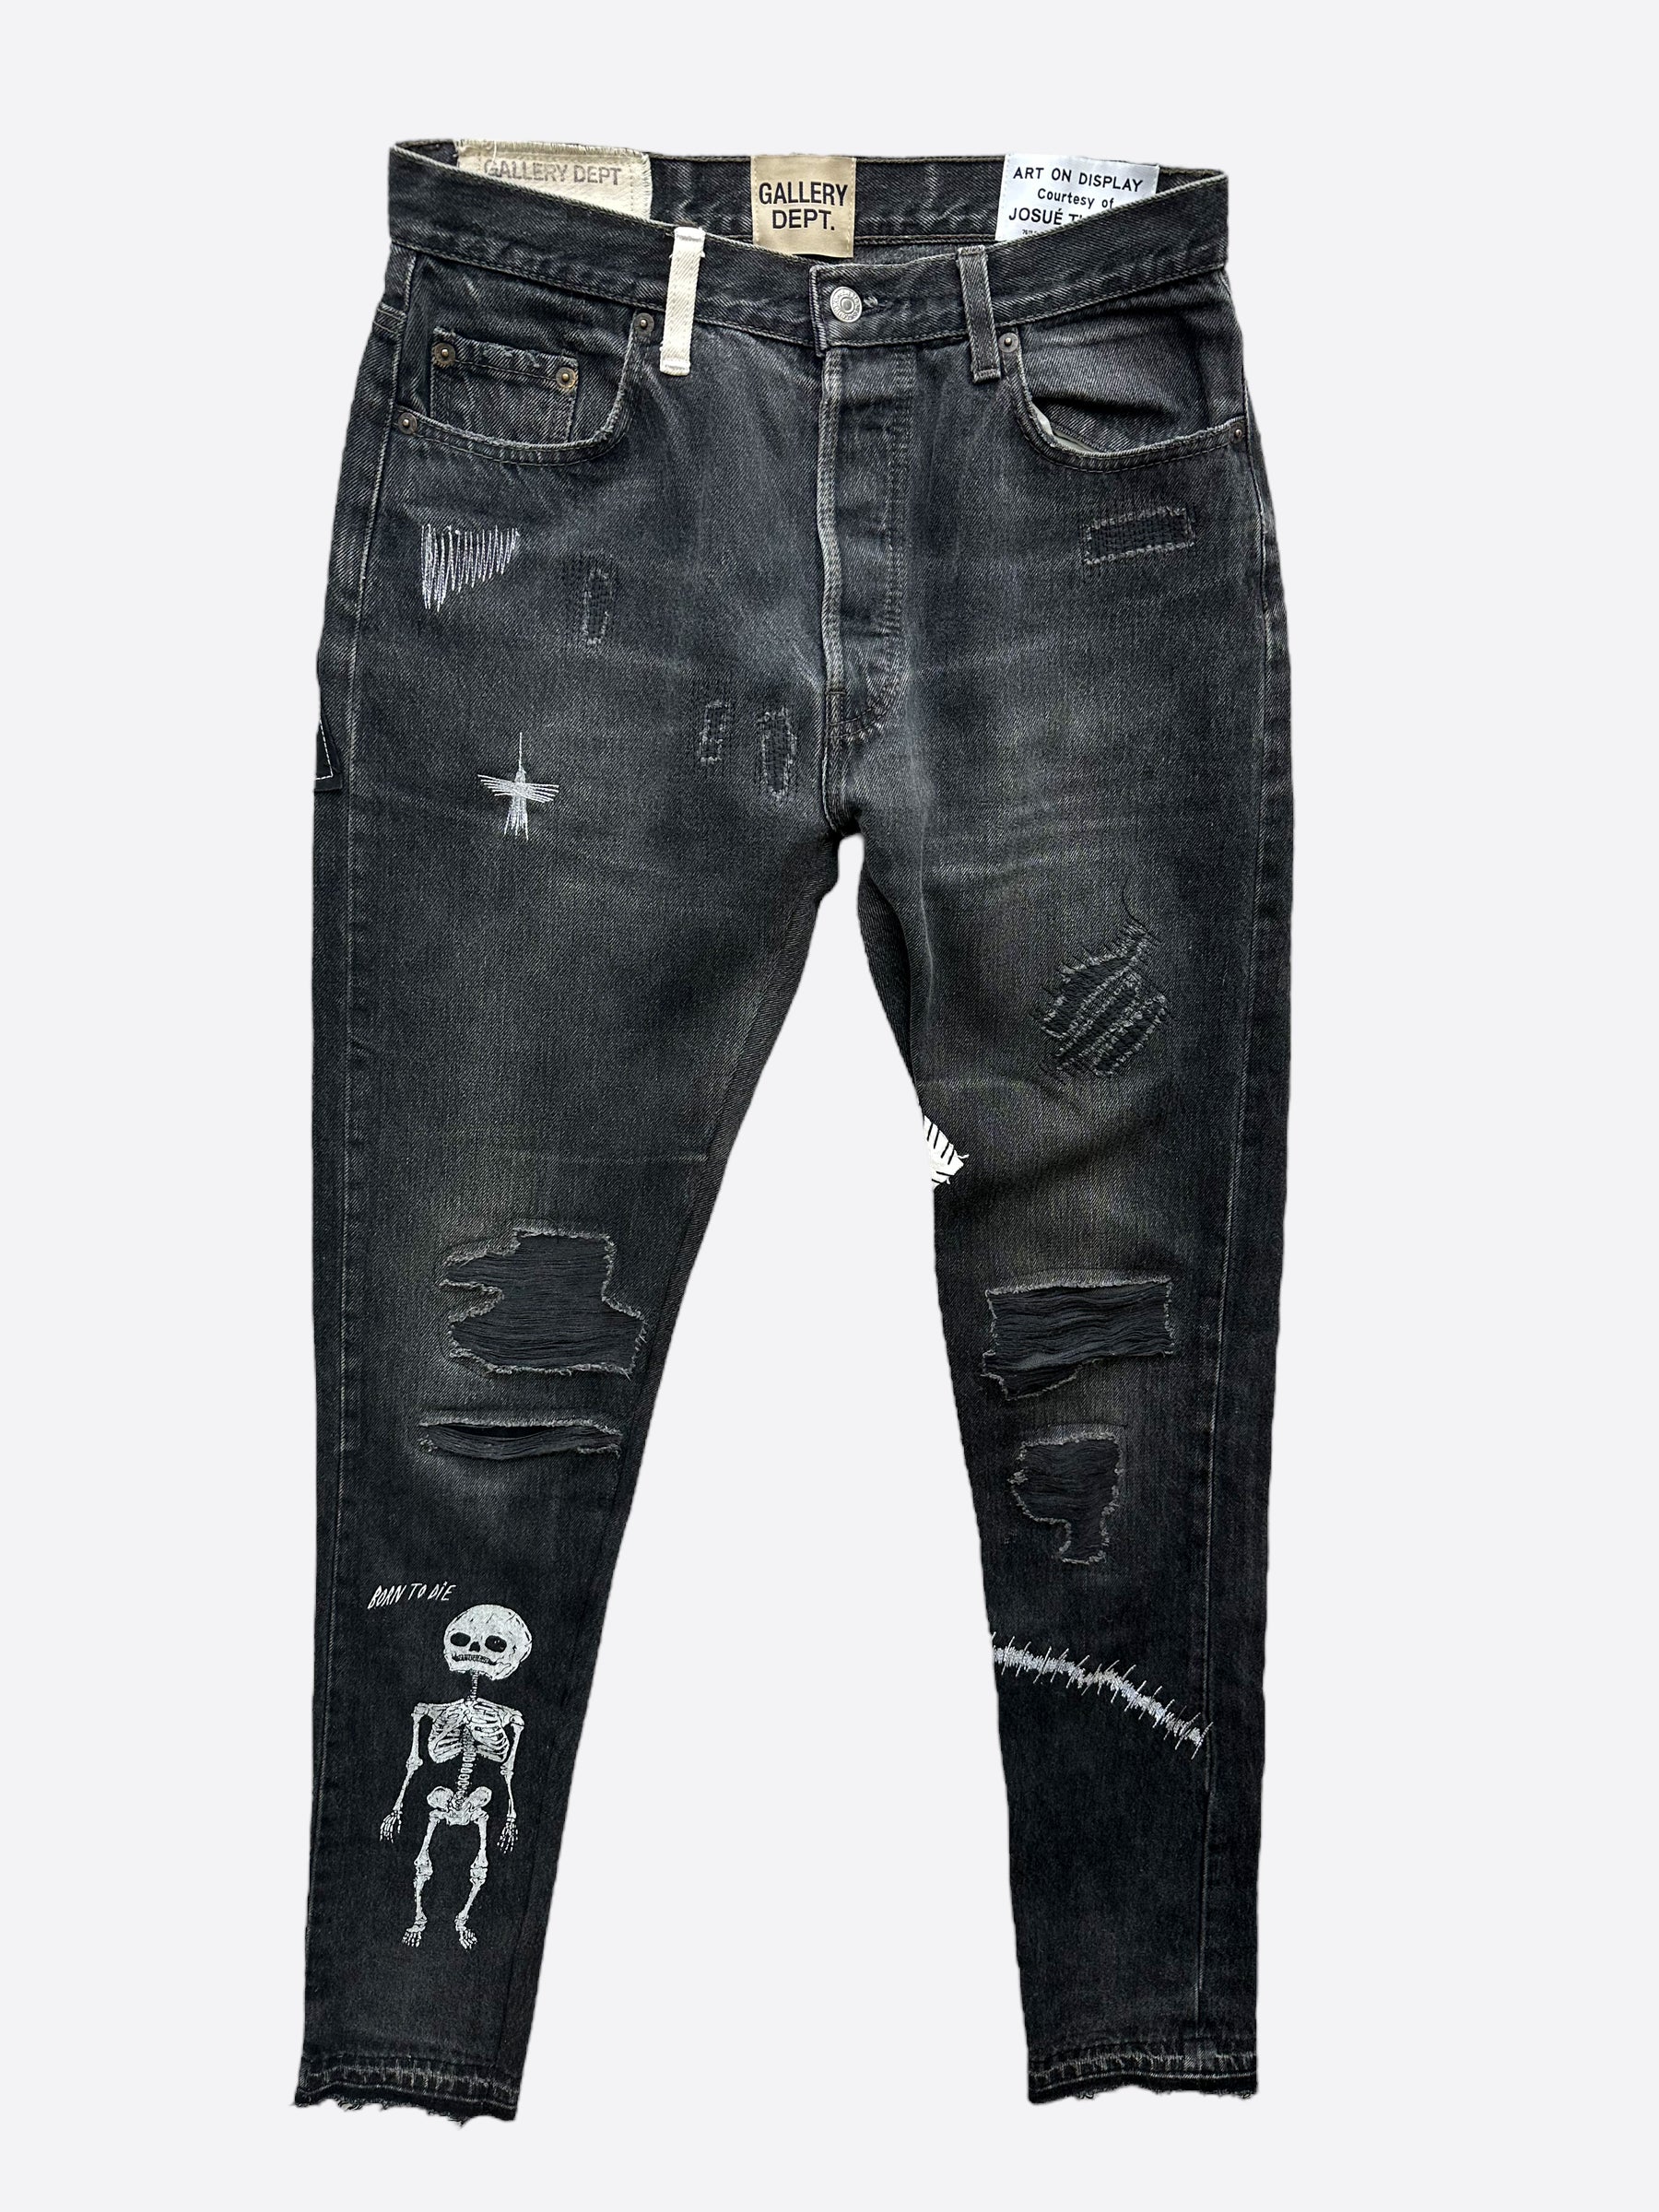 Gallery Dept Black Fuck Face Distressed Jeans – Savonches